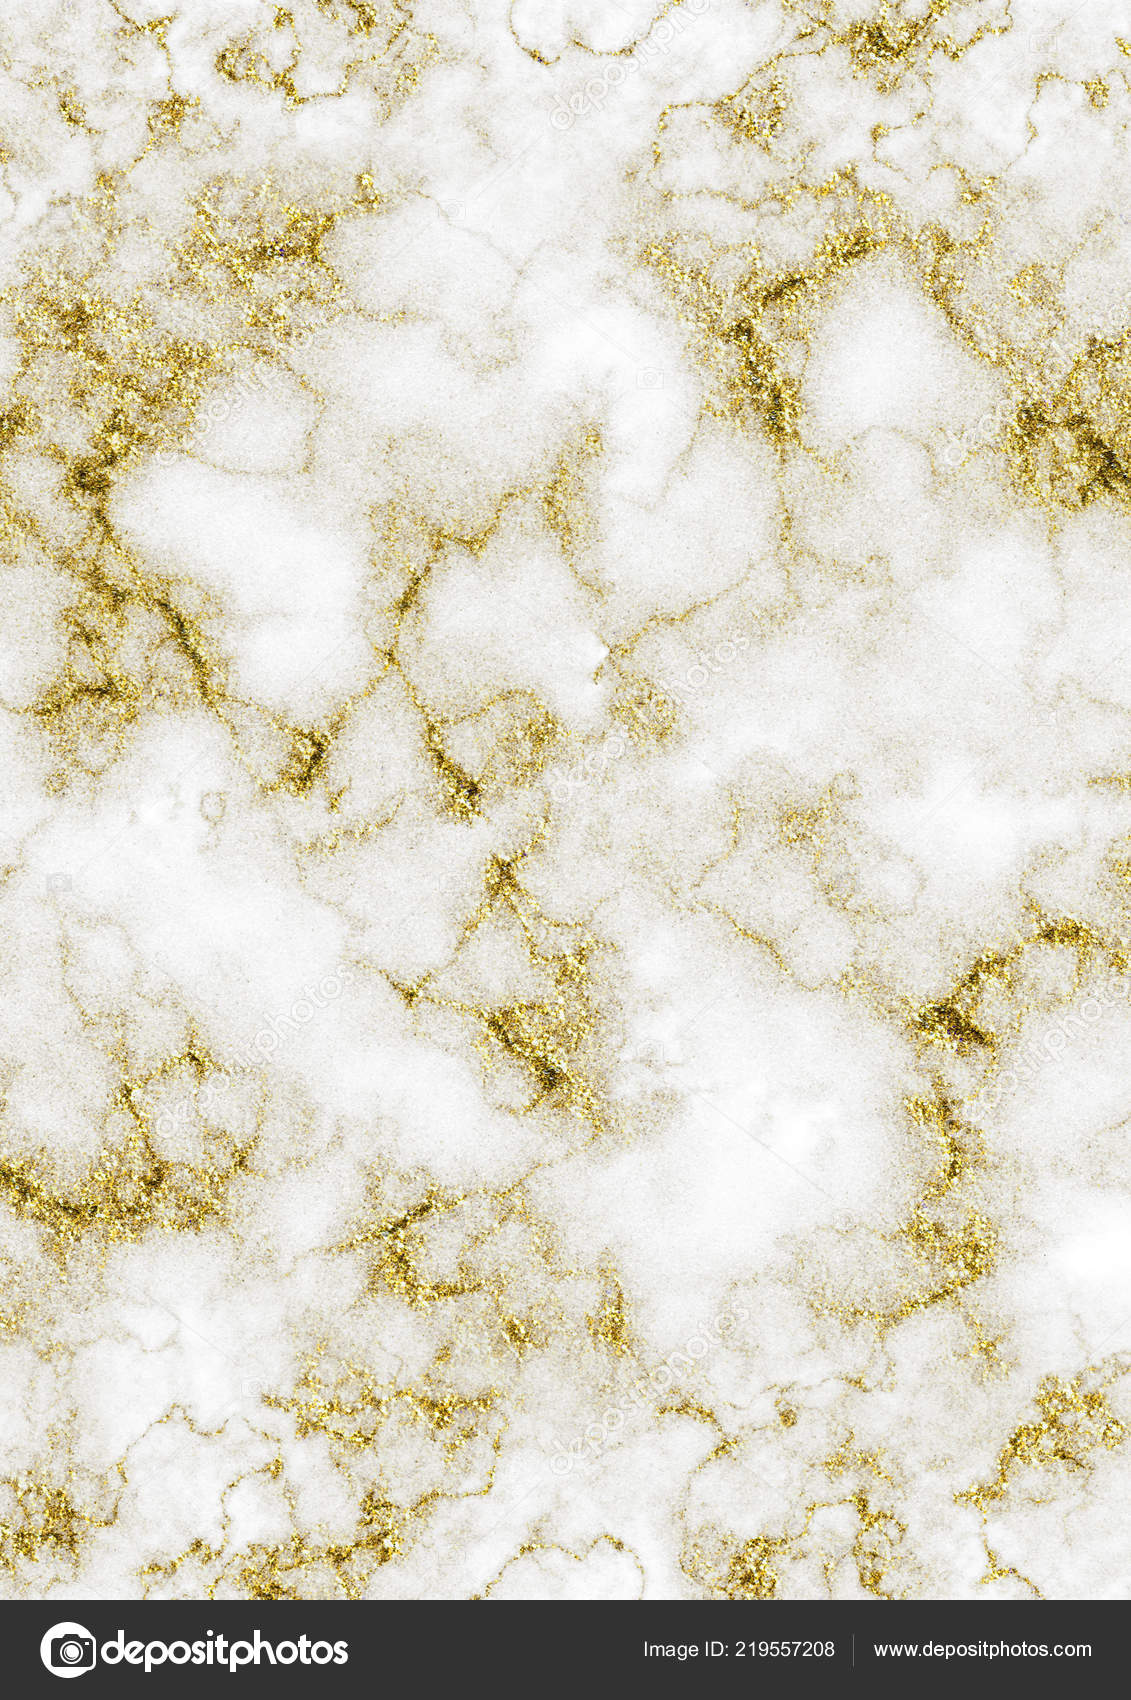 marblewithgoldgoldmarblebybluegoldmarble on white and gold marble wallpapers